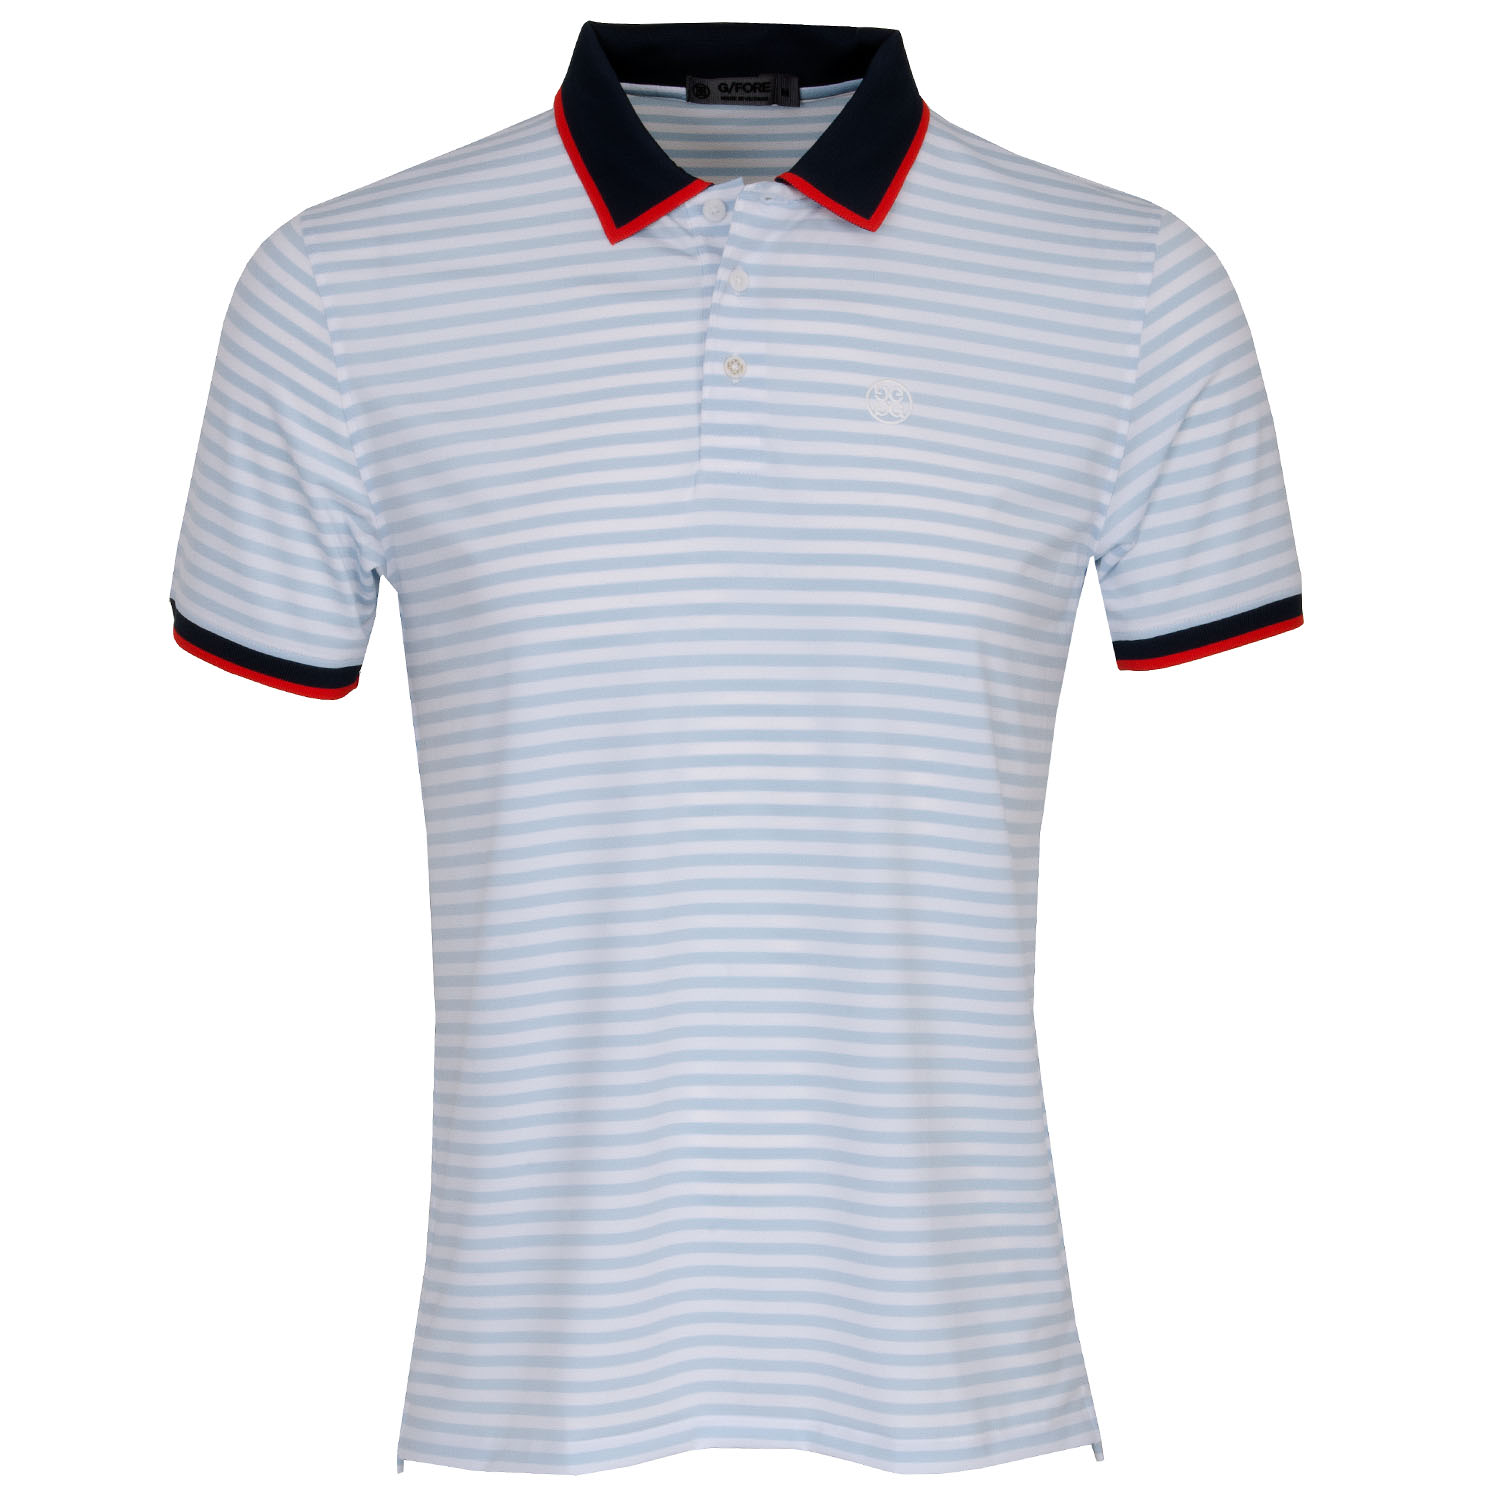 Image of G/FORE Staple Stripe Polo Shirt